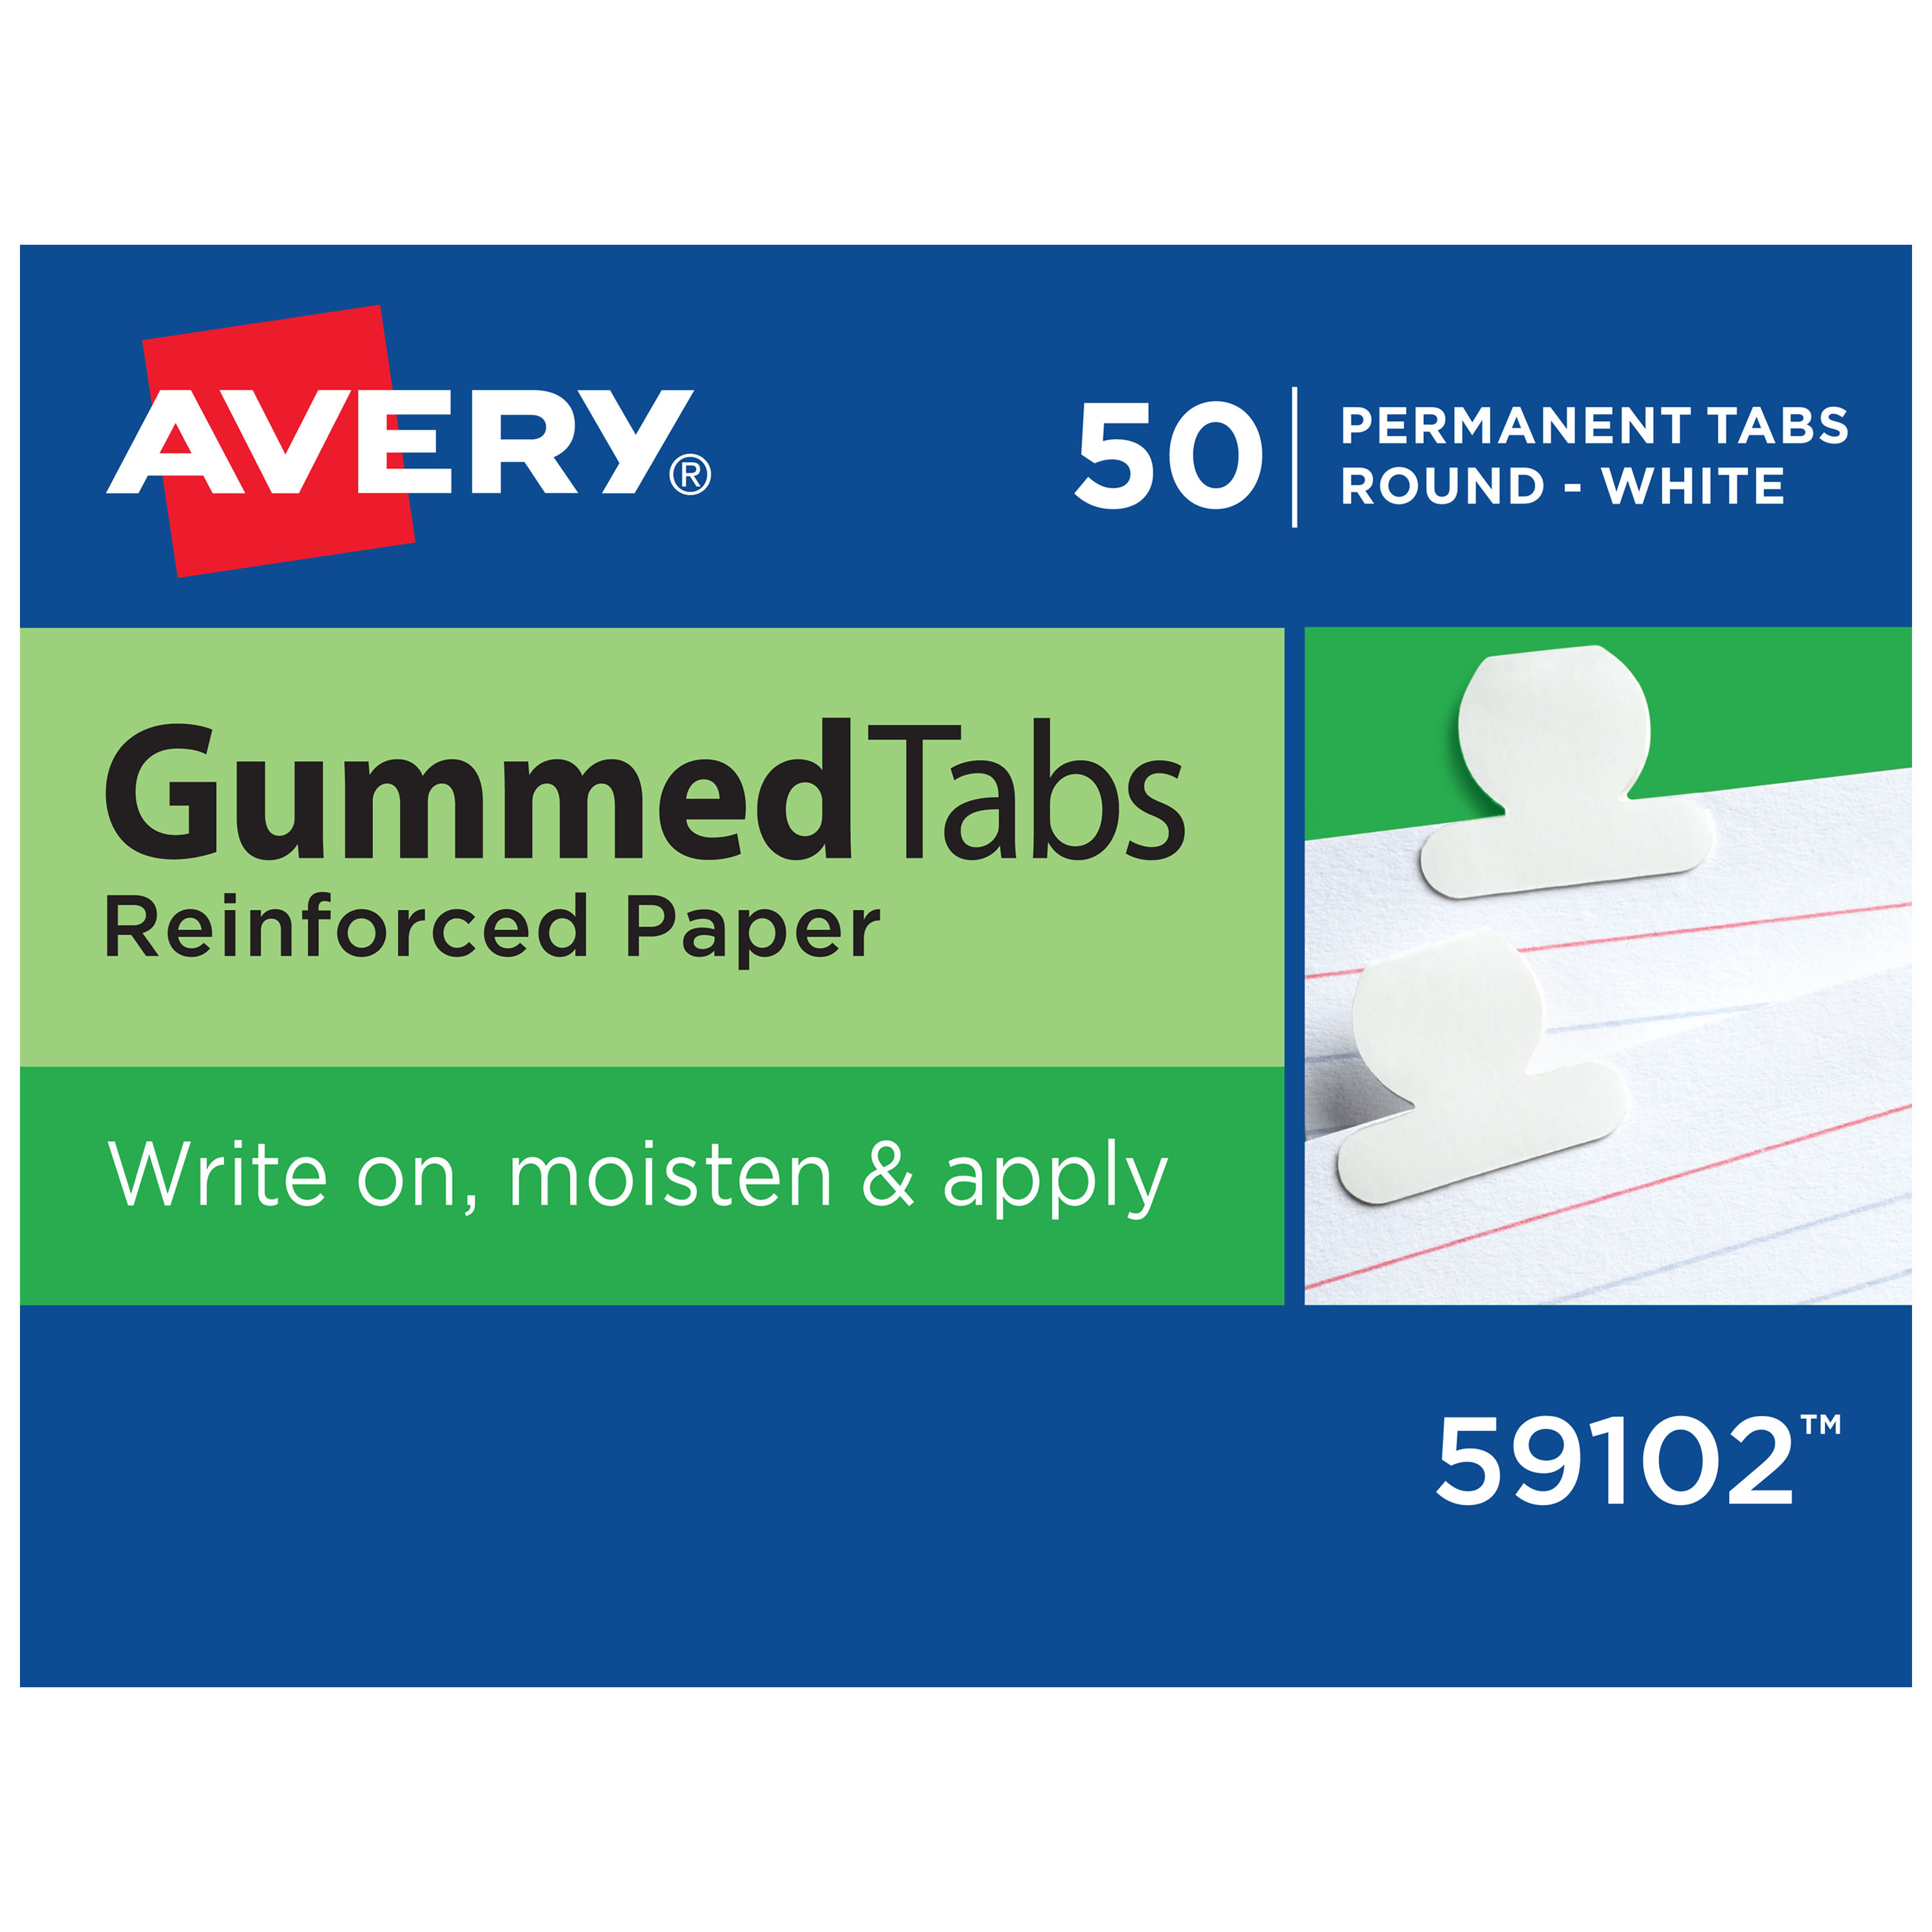 Avery Printable Tabs Self-Adhesive 1-1/4 Assorted Colors 96 Tabs (16281)